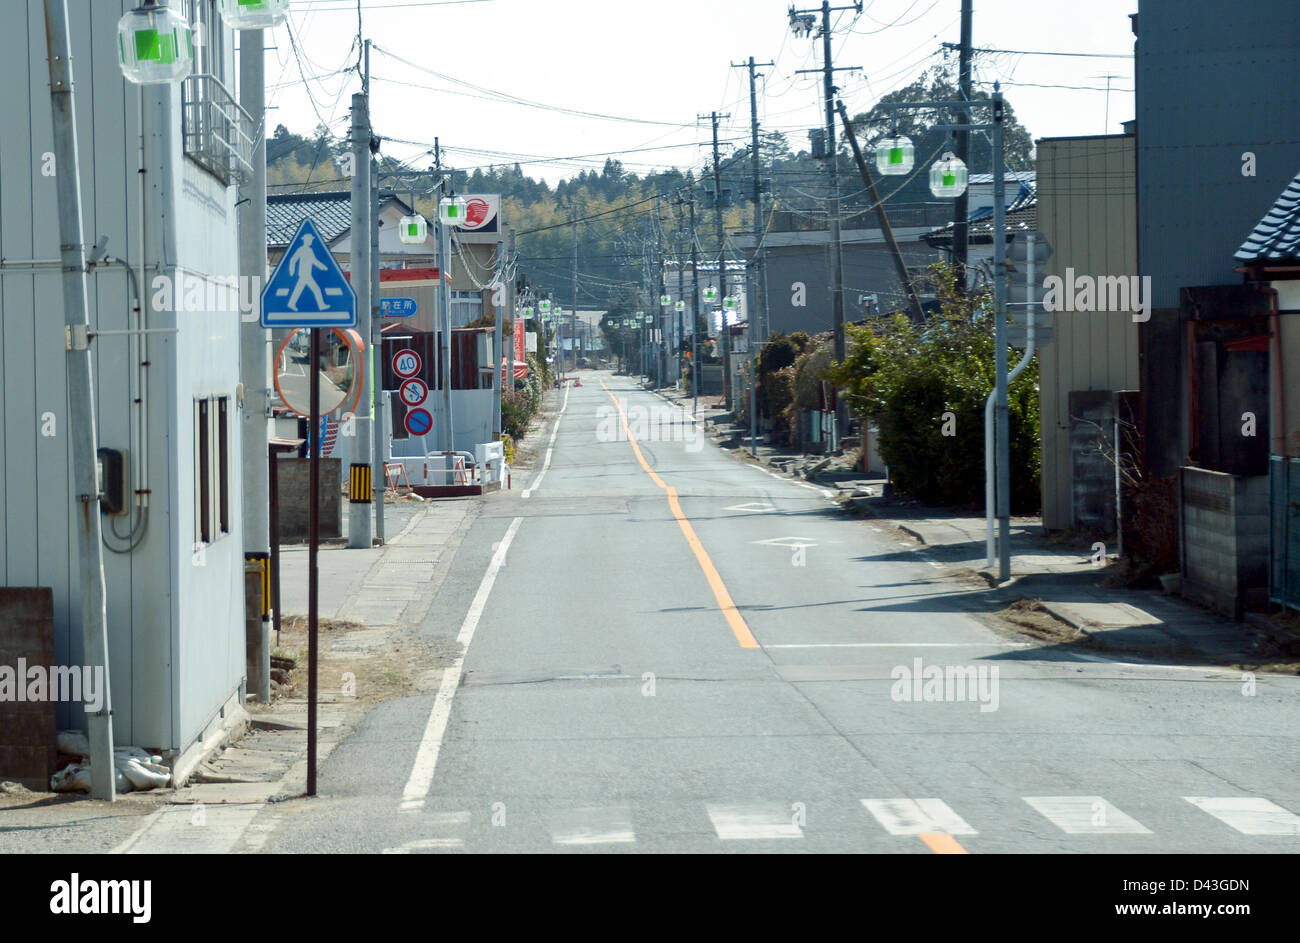 February 28 13 Minami Soma City Japan The Main Street Of Minami Soma A Sleepy Little Country Town Located Some 240 Km Northeast Of Tokyo Is Desolated On February 28 13 Almost Three